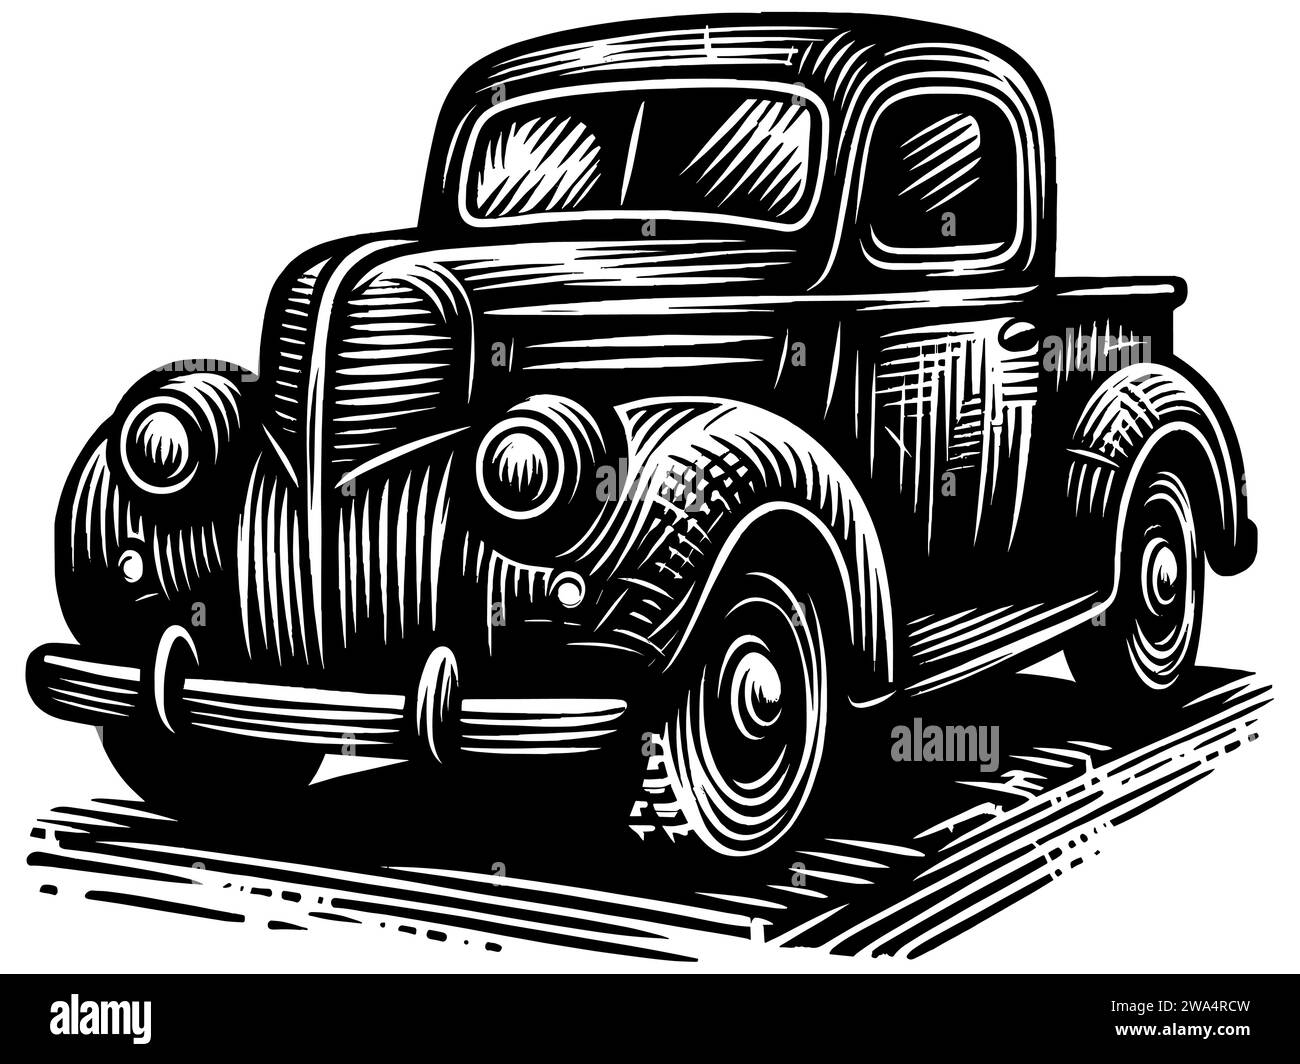 Woodcut style illustration of a vintage pickup truck in black and white. Stock Vector